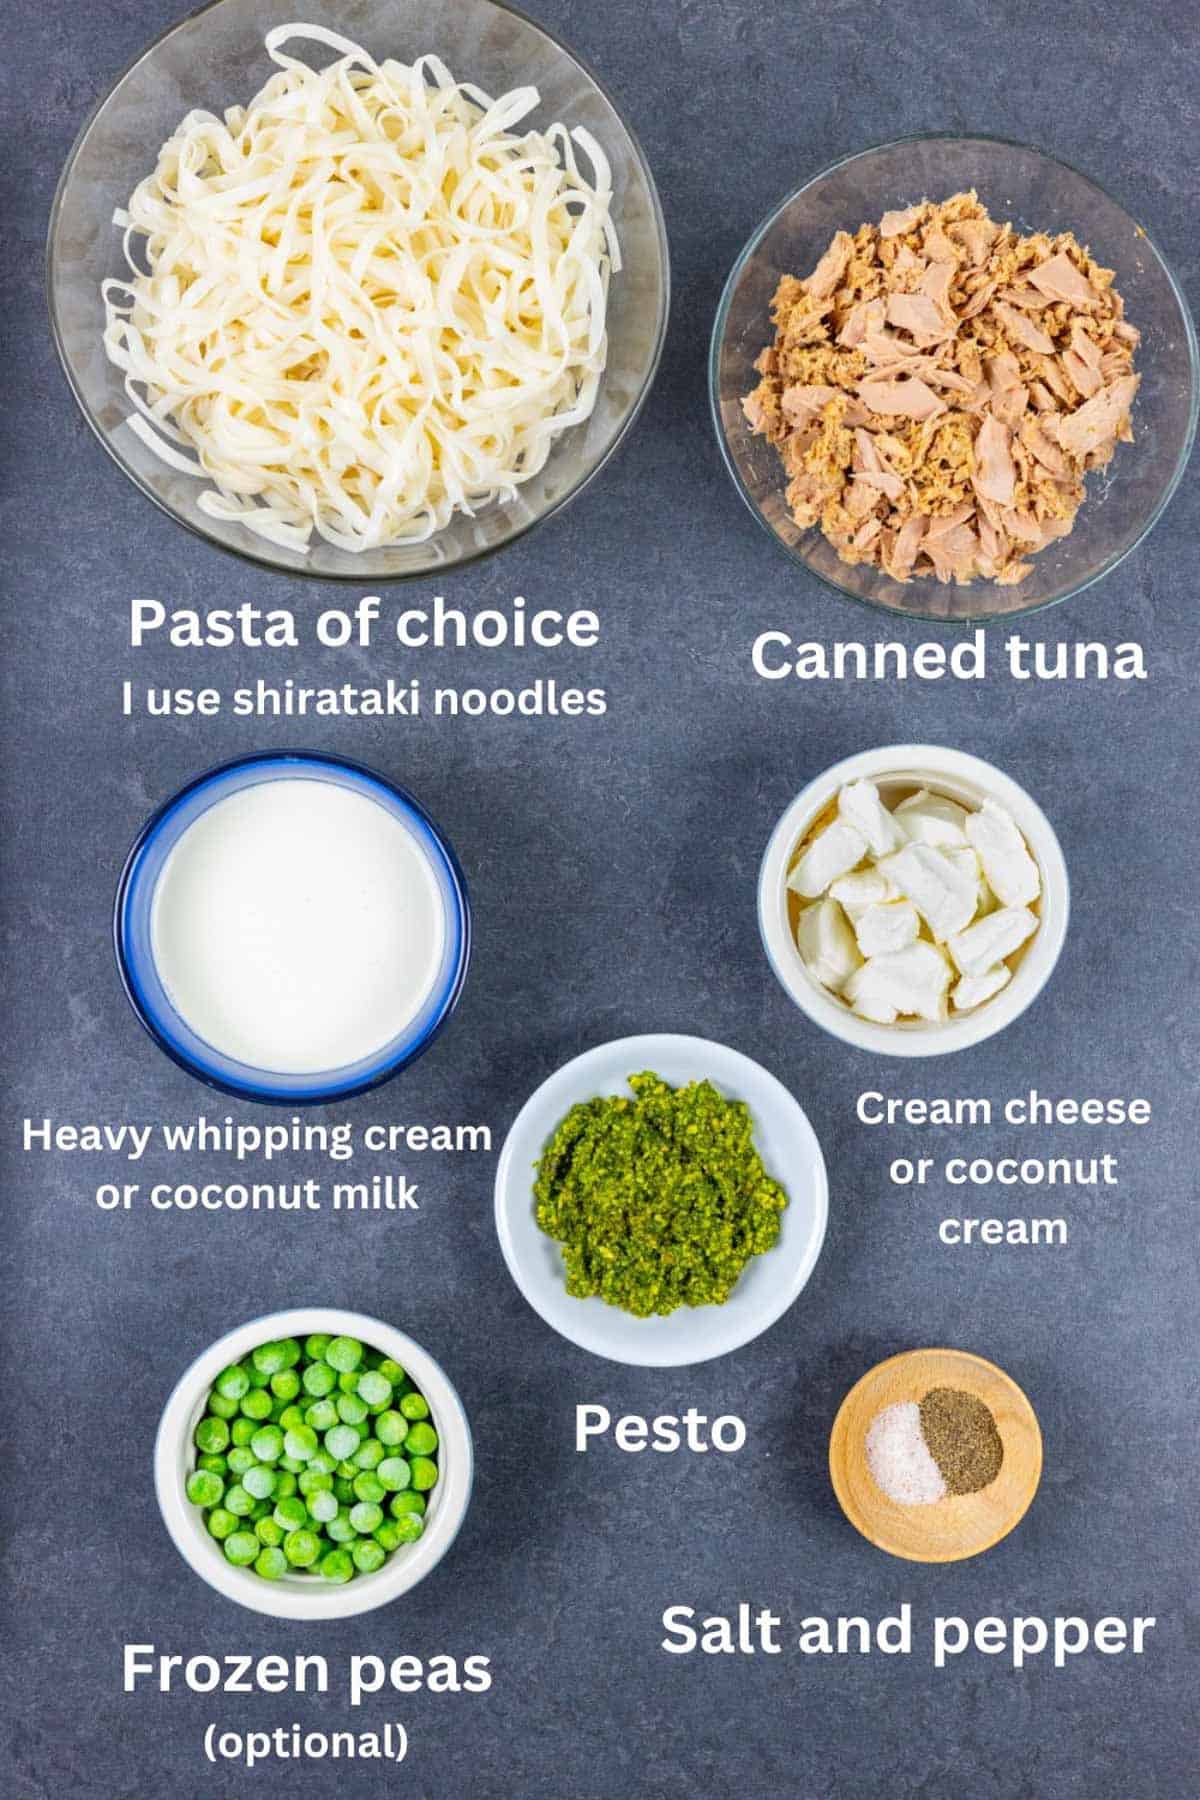 Small bowls of ingredients for tuna and noodles with white text labels.